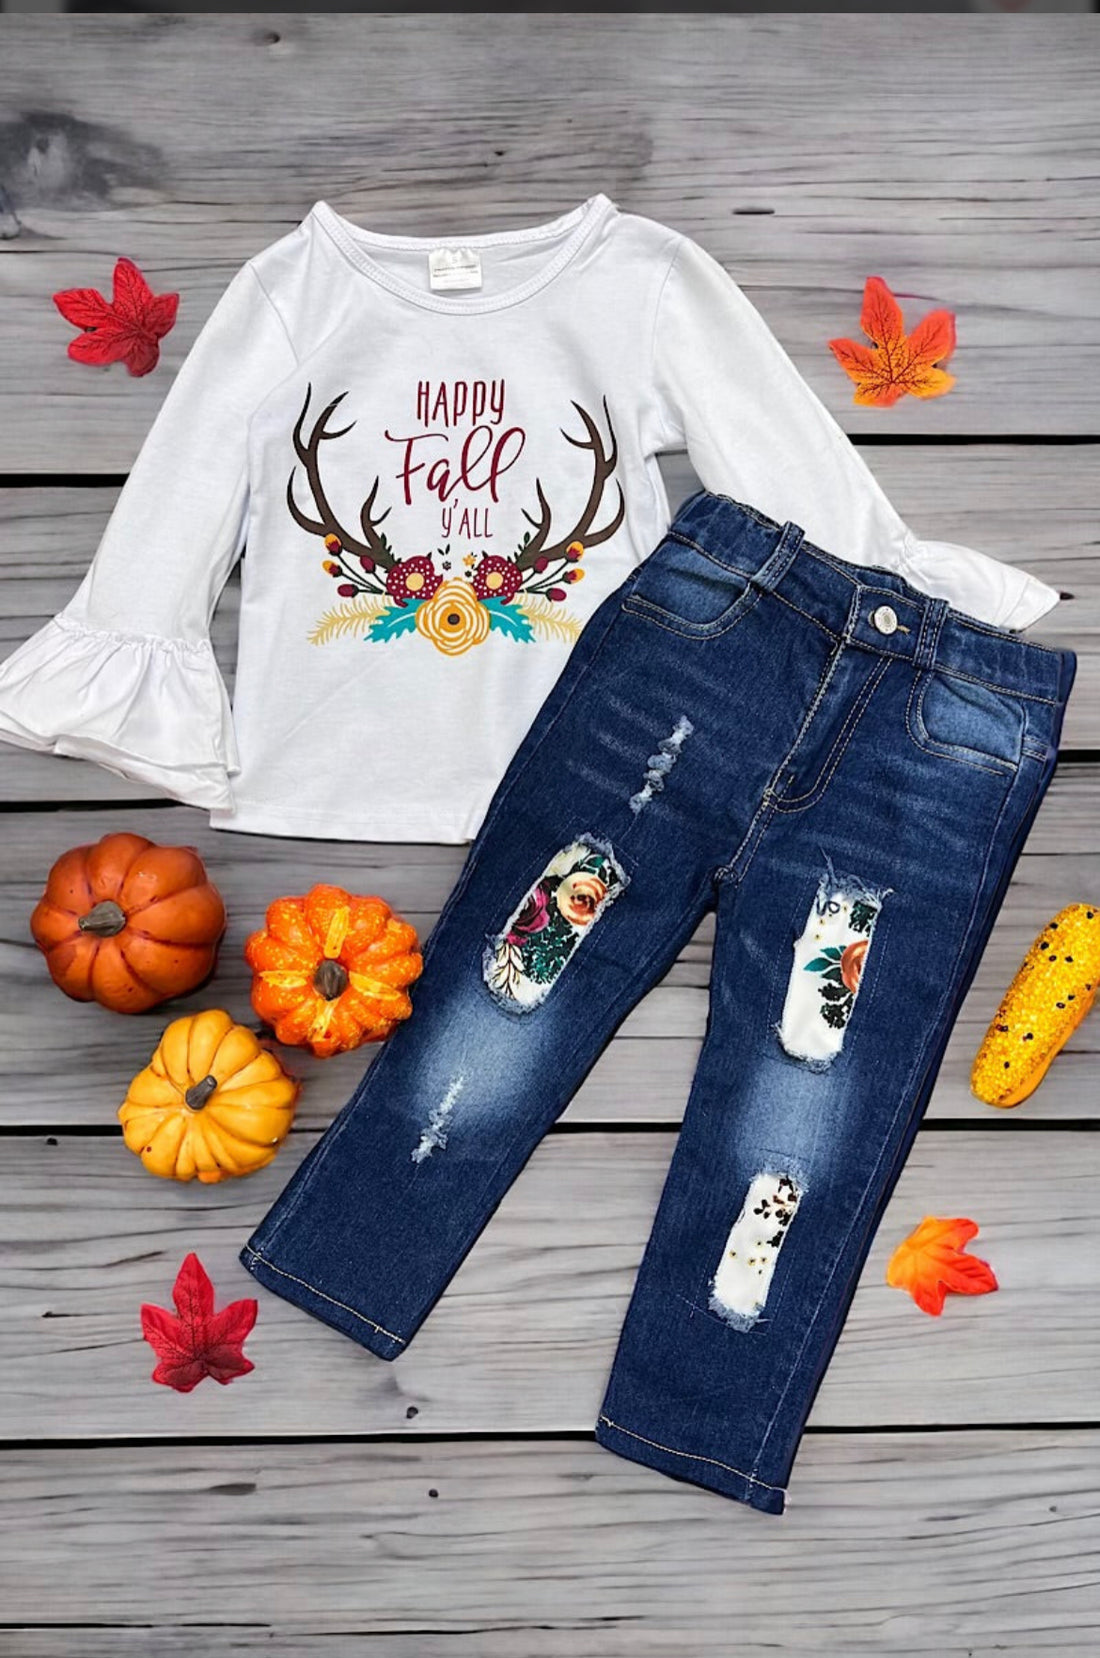 “Happy Fall Y’all” Girls Graphic Shirt with Ruffle Sleeves and Denim Pants with Floral Patches